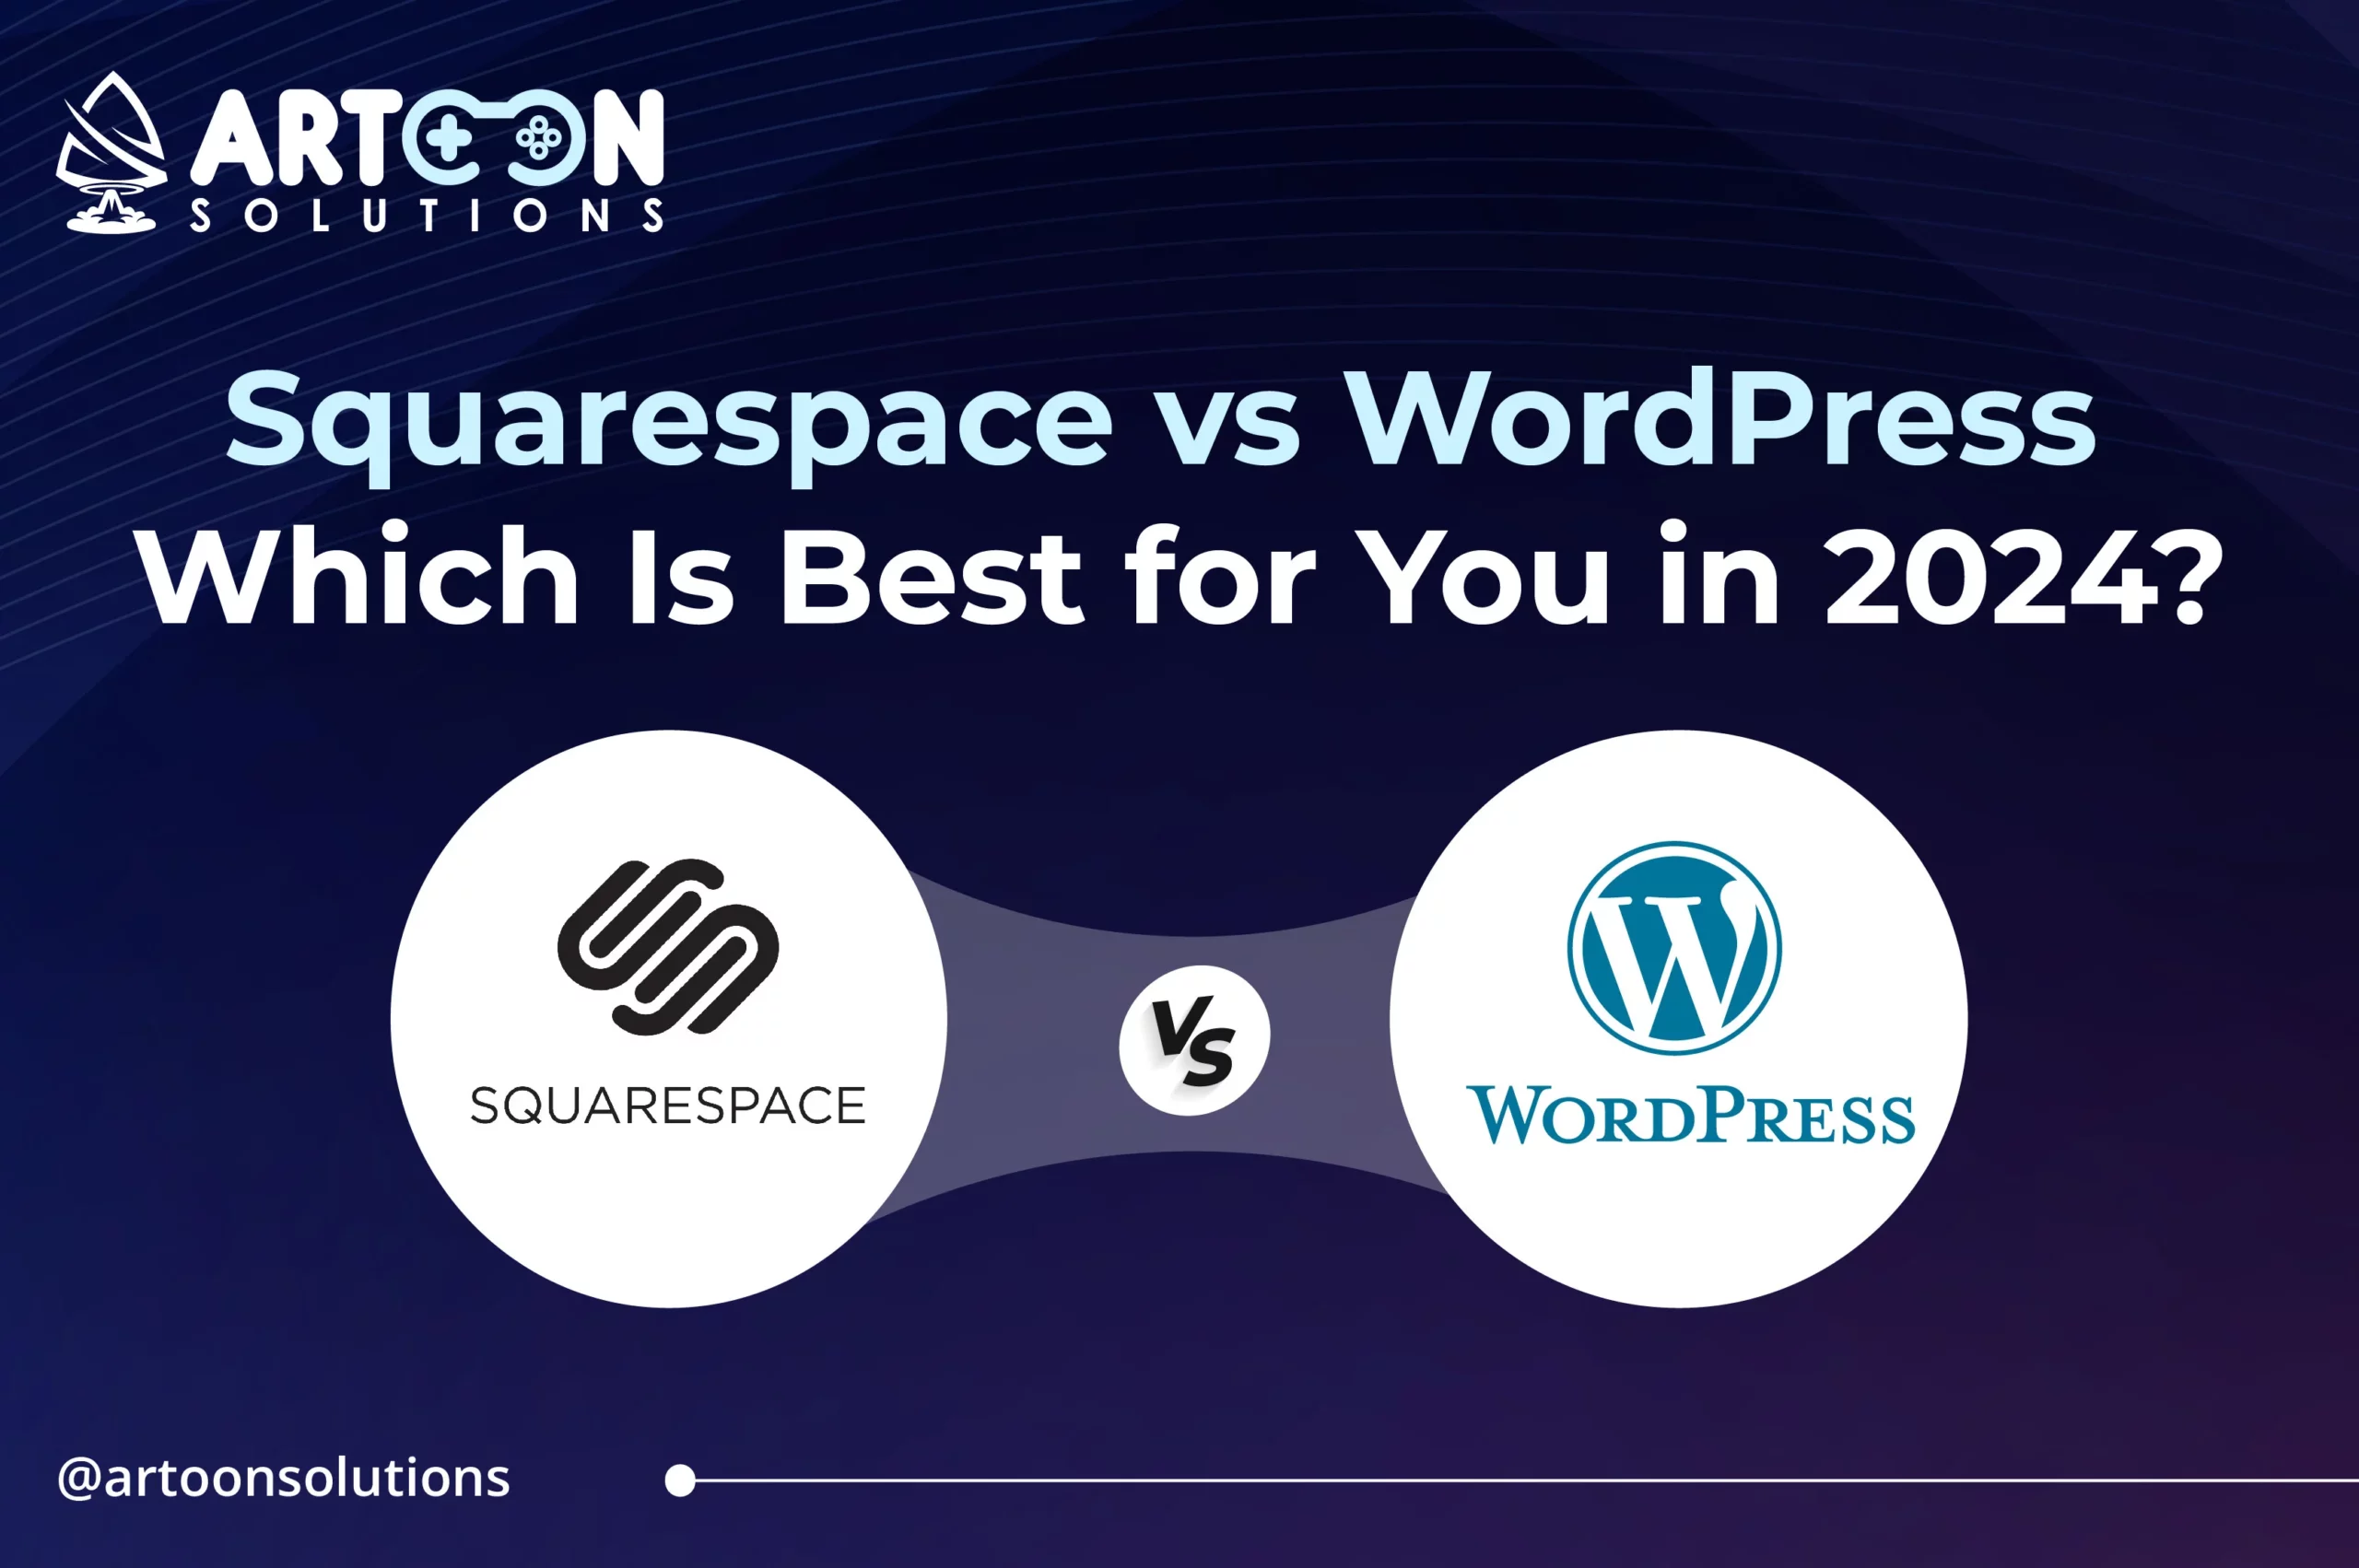 Squarespace vs WordPress: Which Is Best for You in 2024?